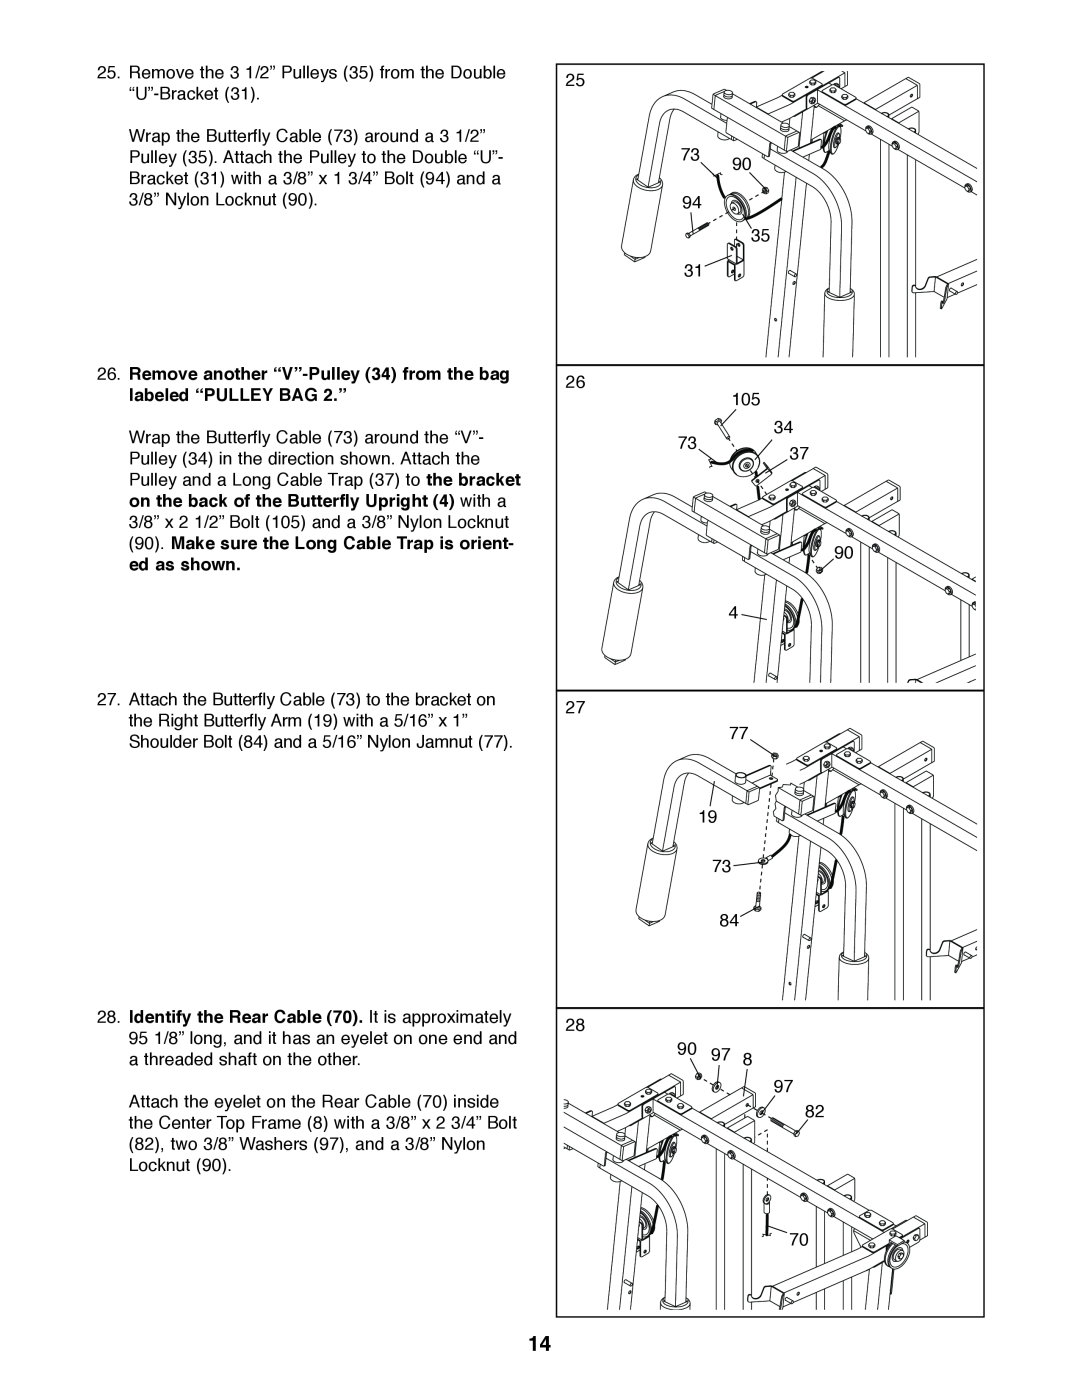 Weider 831.159830 user manual Remove another “V”-Pulley 34 from the bag, labeled “PULLEY BAG 2.”, ed as shown 